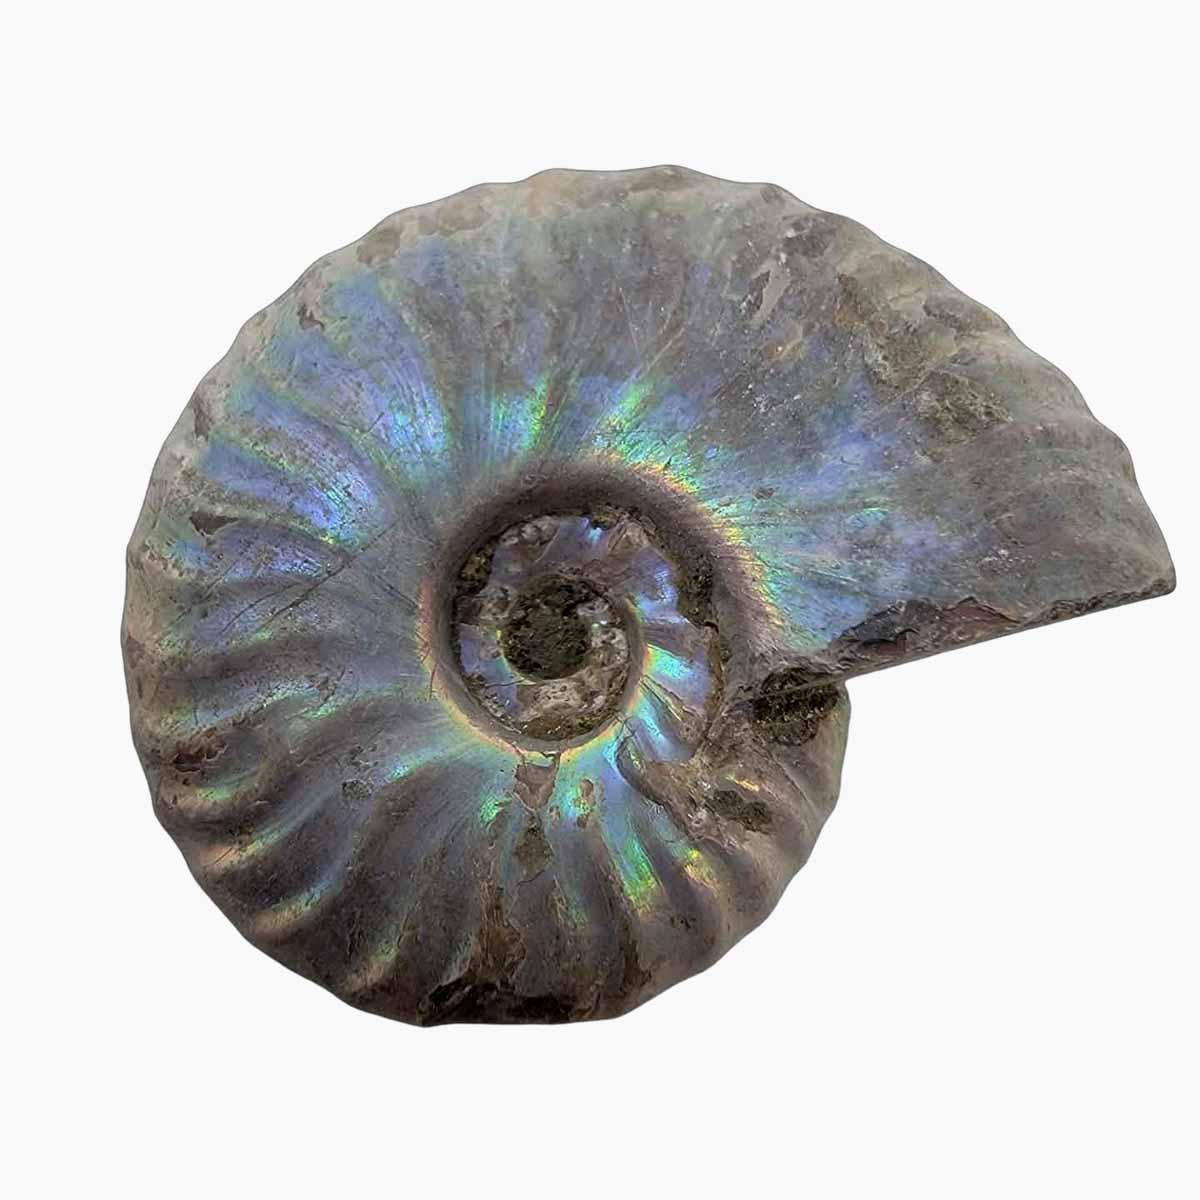 Silver Iridescent Ammonite Fossil!  110 Million Years Old! - LapidaryCentral